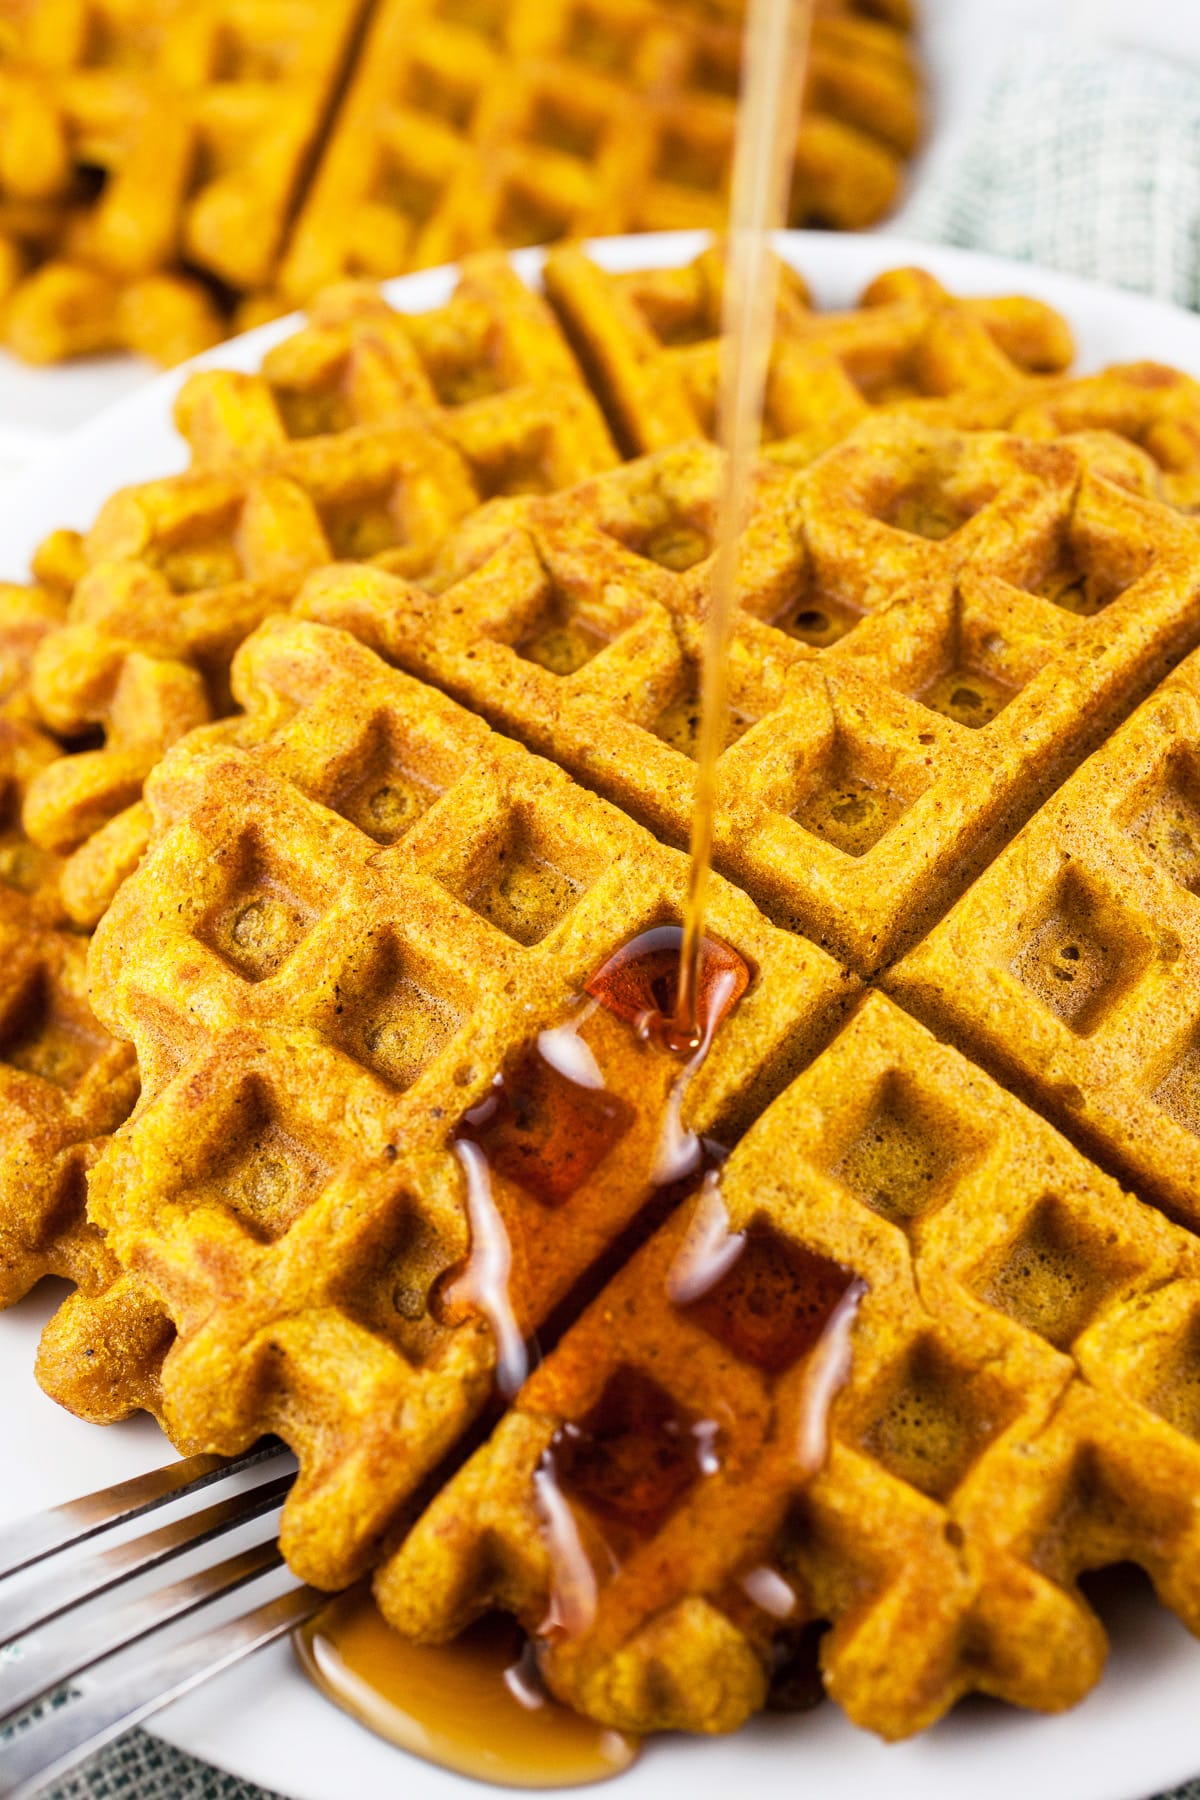 Maple syrup poured over pumpkin waffles on white plate with fork.